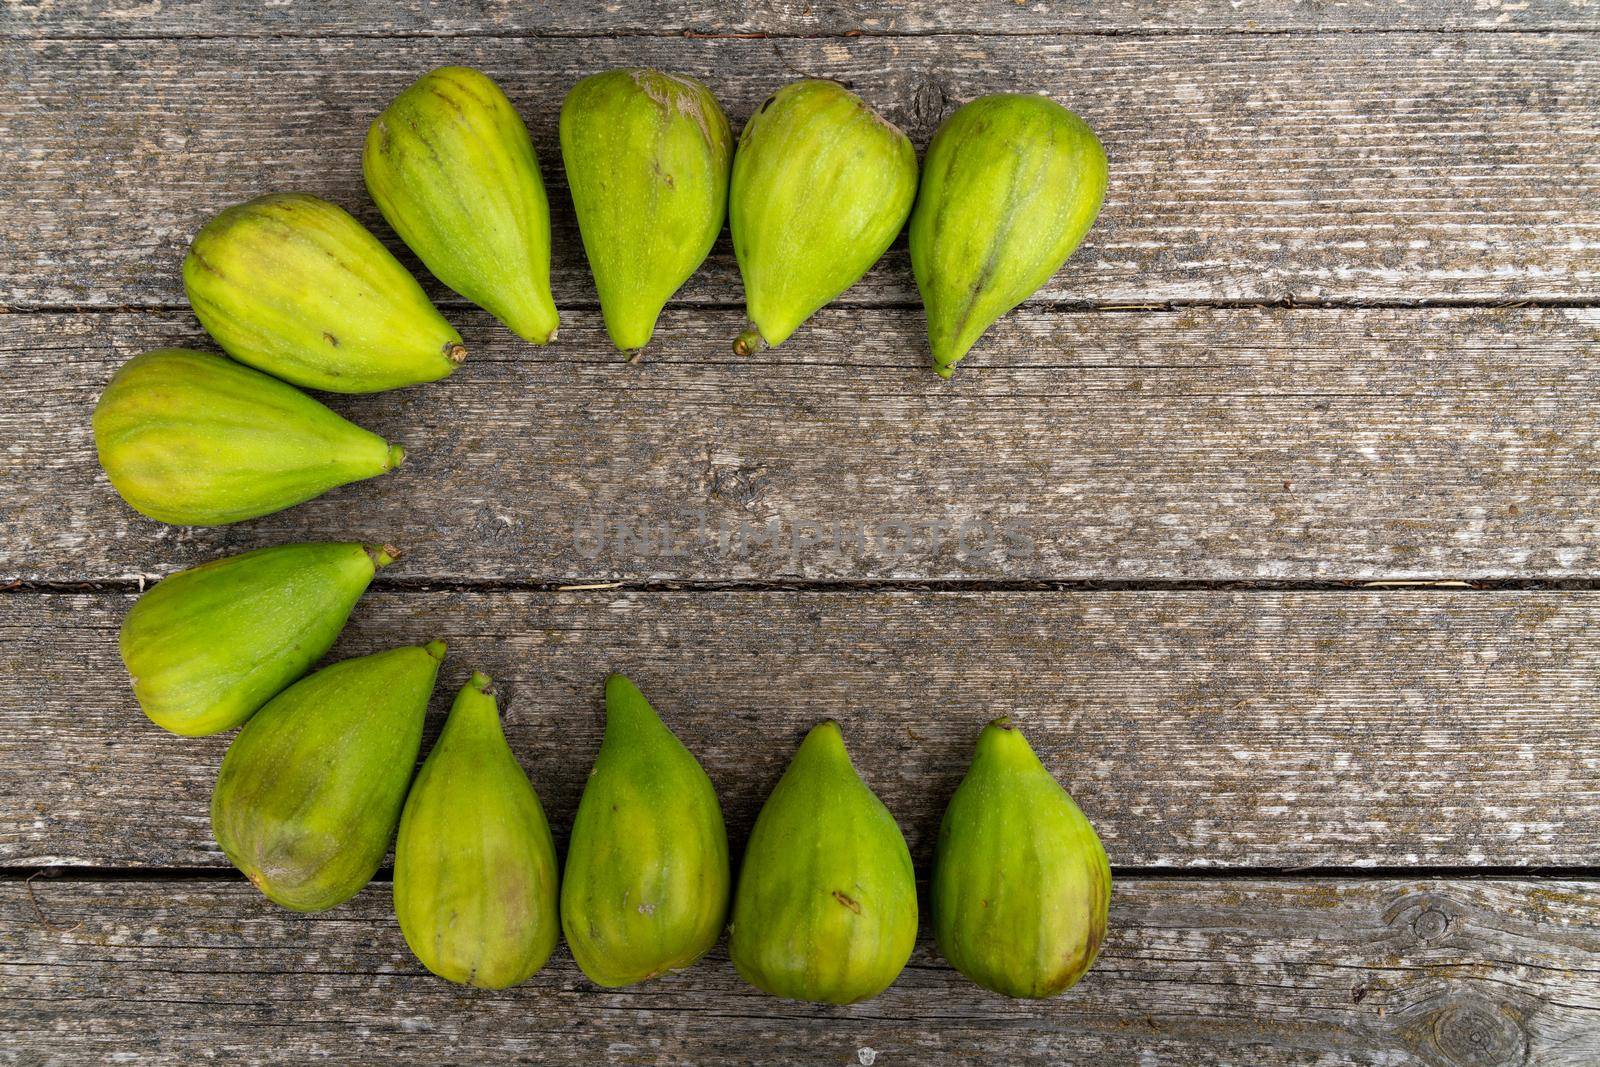 Fresh figs. Ripe figs on a wooden background. Bulk figs close-up.